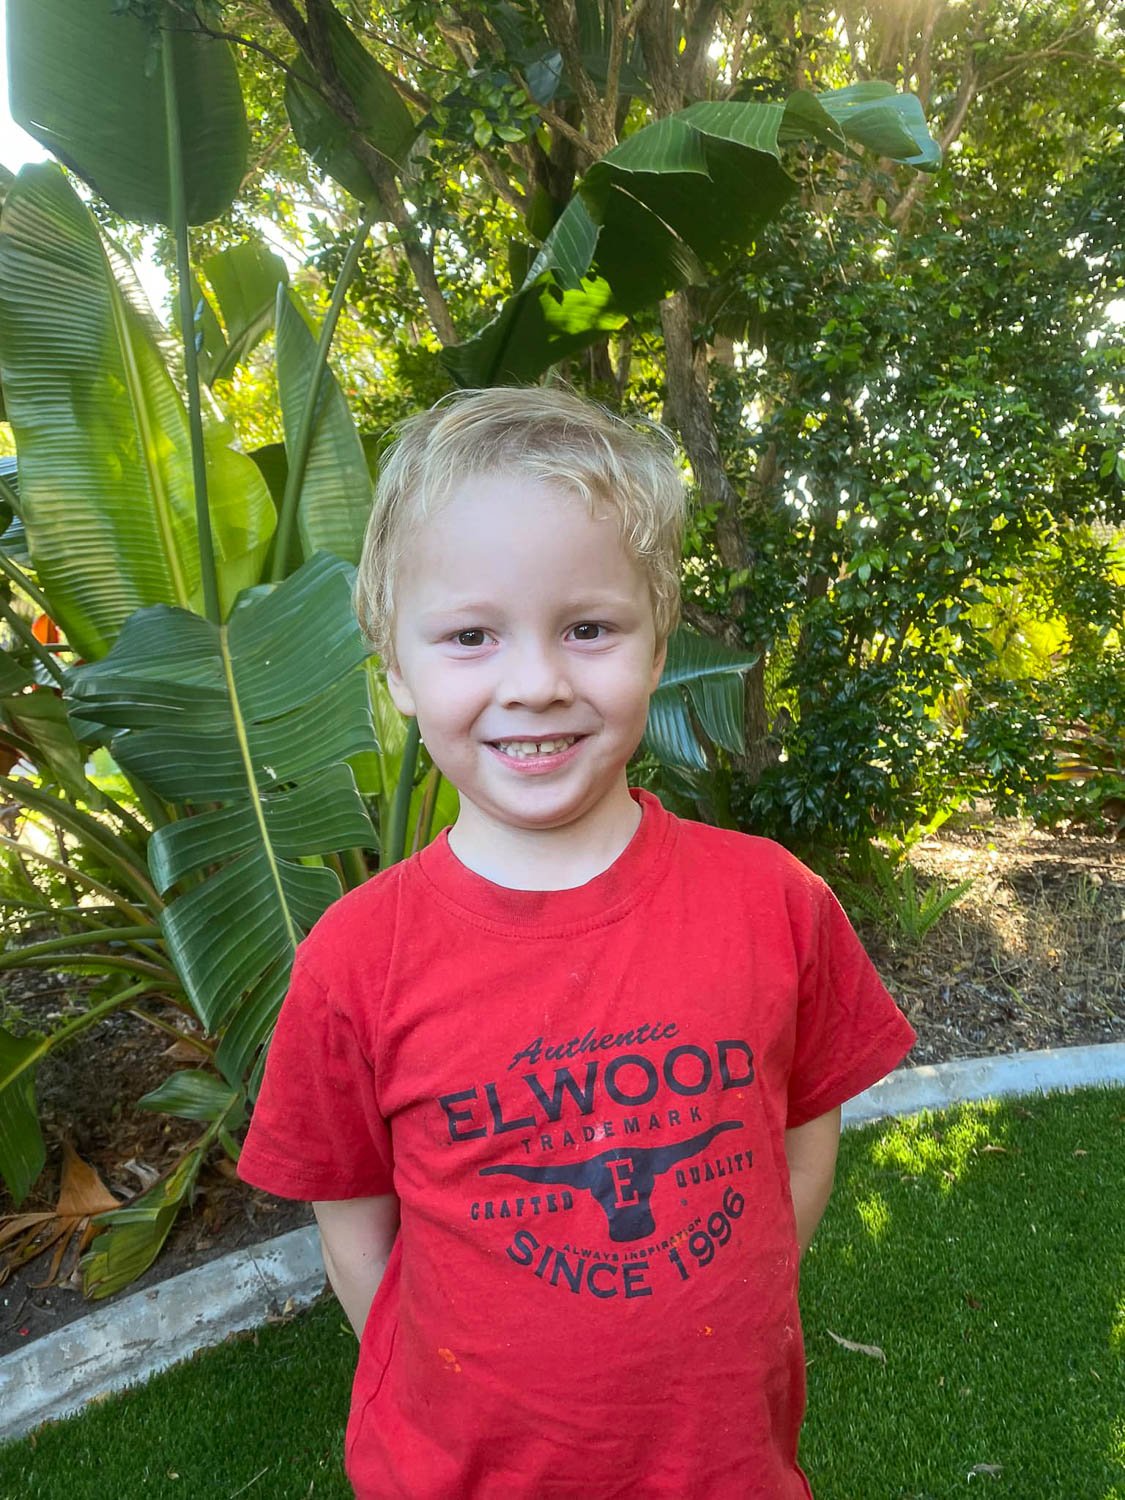 A blonde haired young boy in a red t-shirt standing in front of leafy background